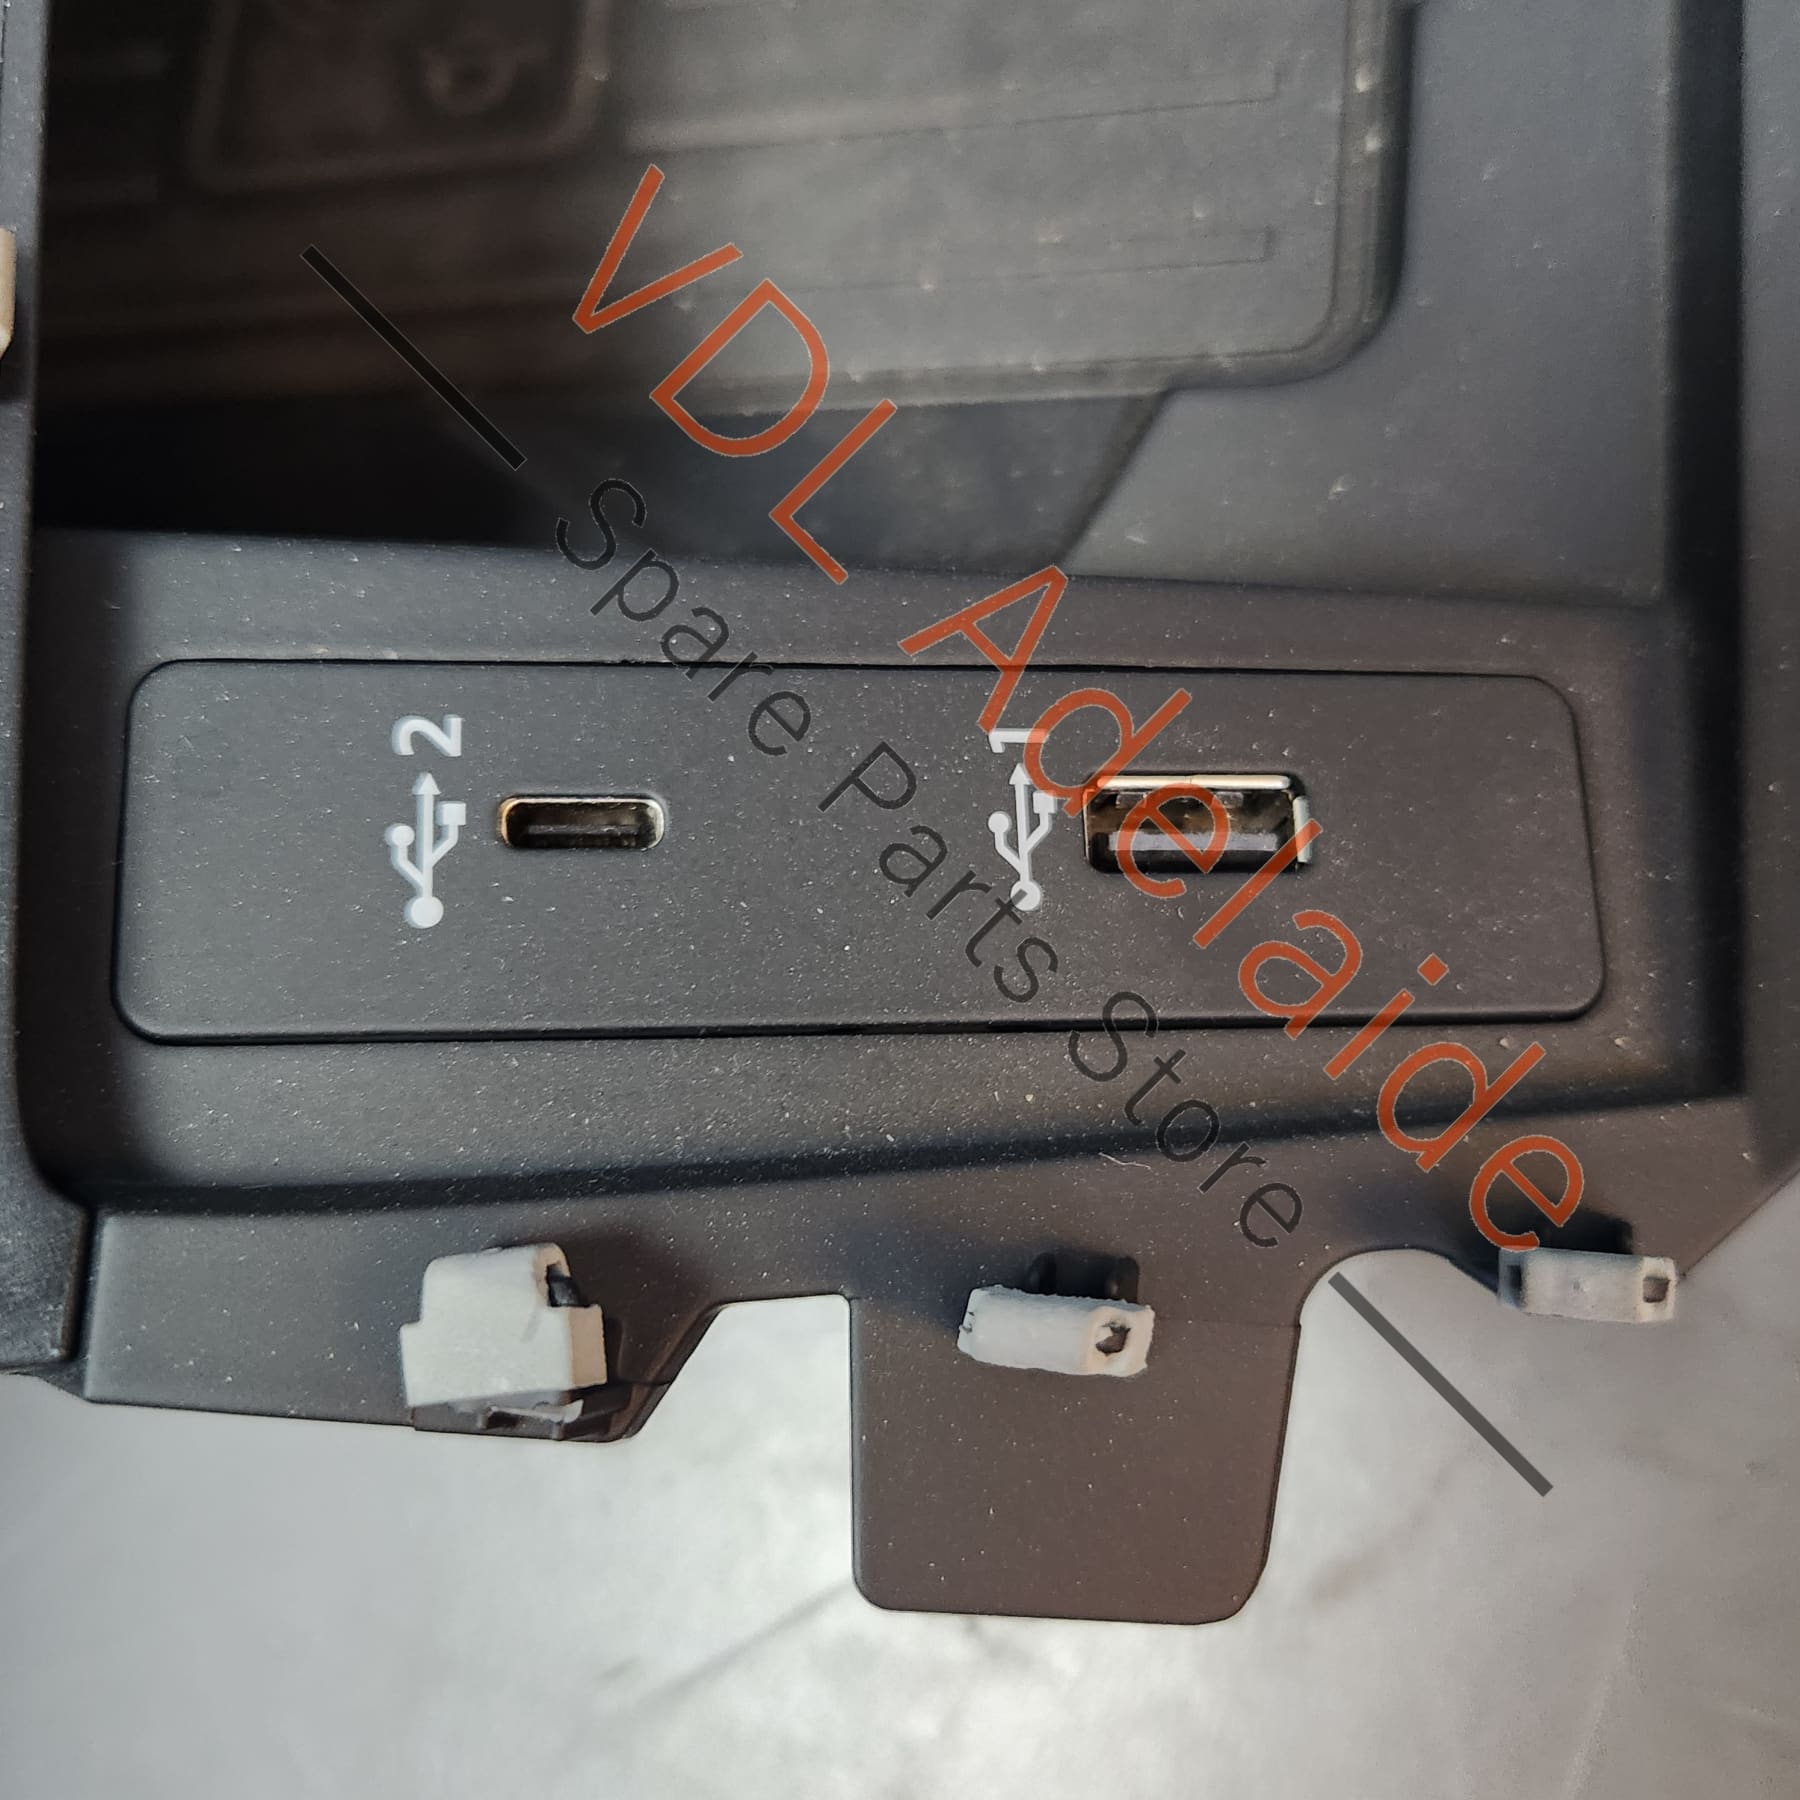 83A035736    Audi RSQ3 F3 Double USB Port & Cordless Phone Charging Dock 83A035736